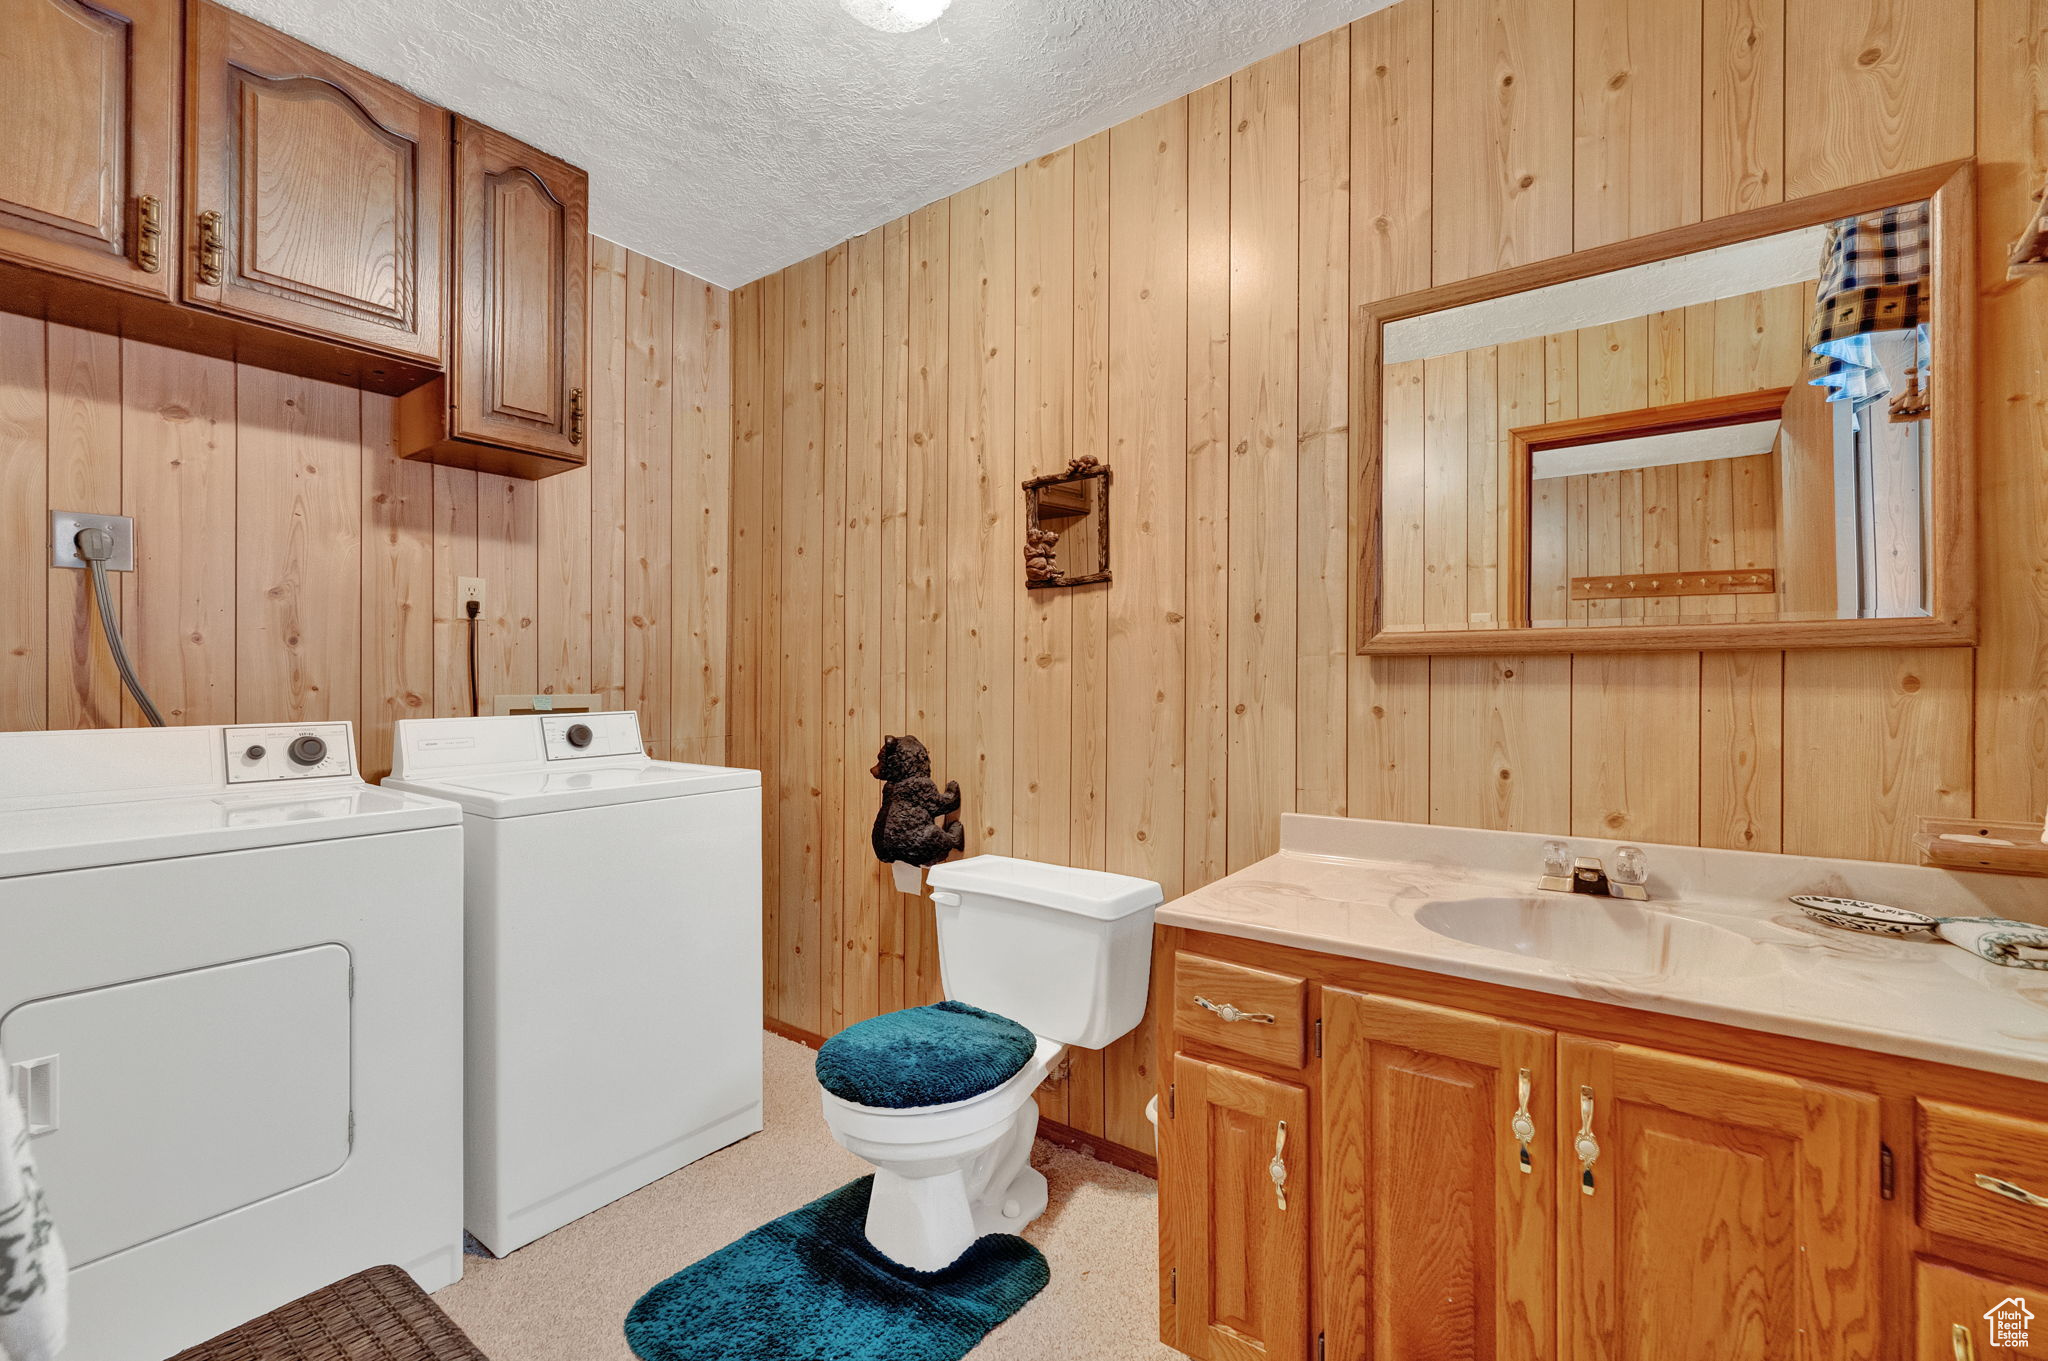 Bathroom featuring large vanity, a textured ceiling, independent washer and dryer, wooden walls, and toilet